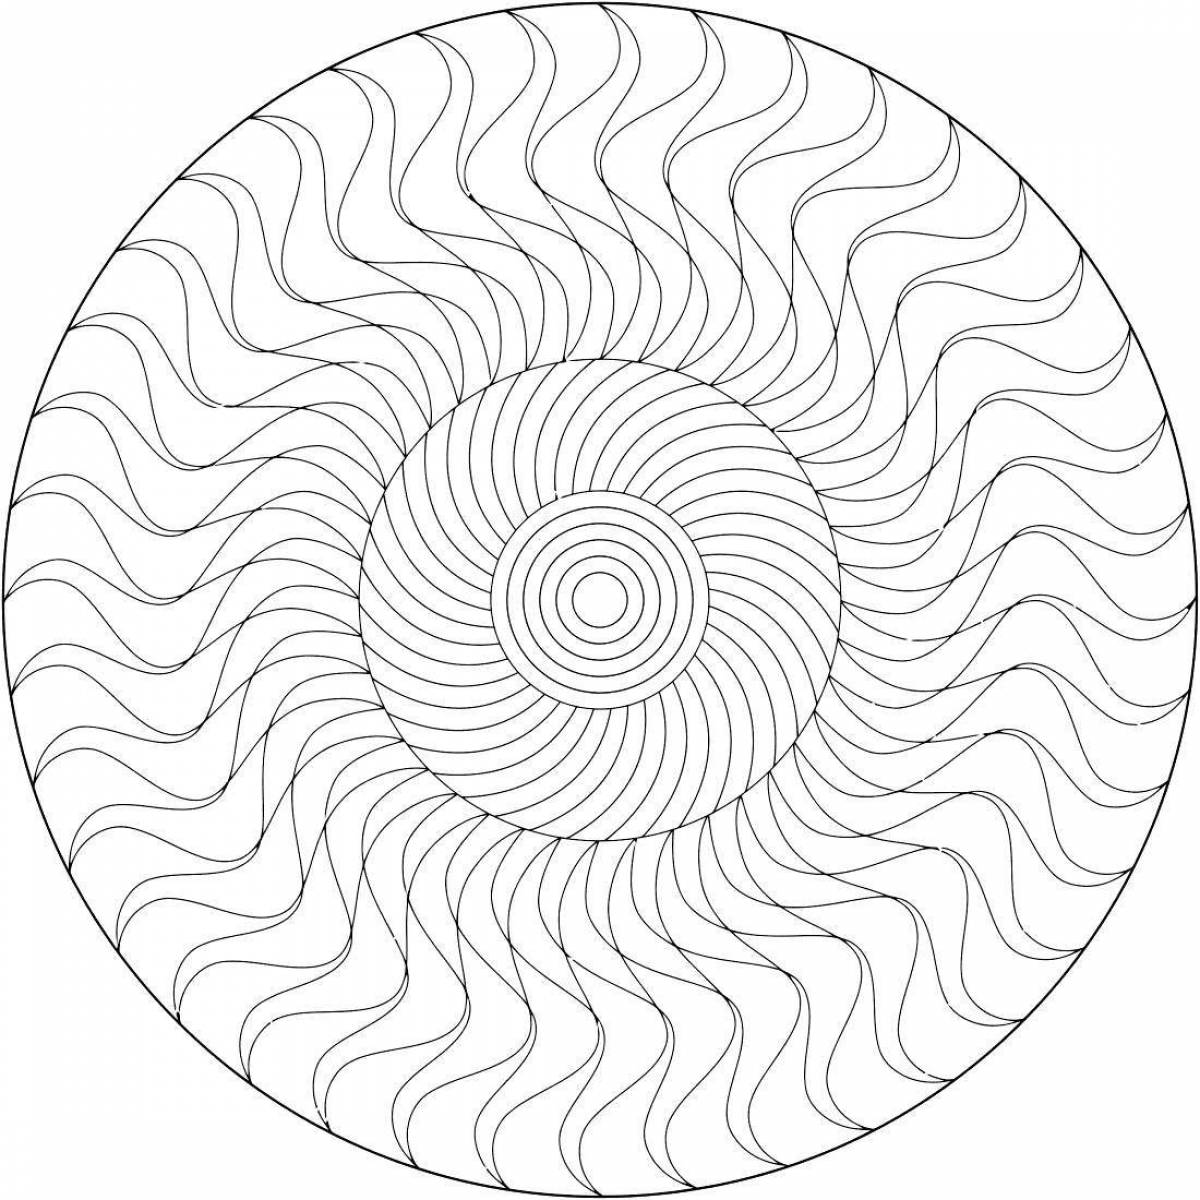 Intricate spiral coloring